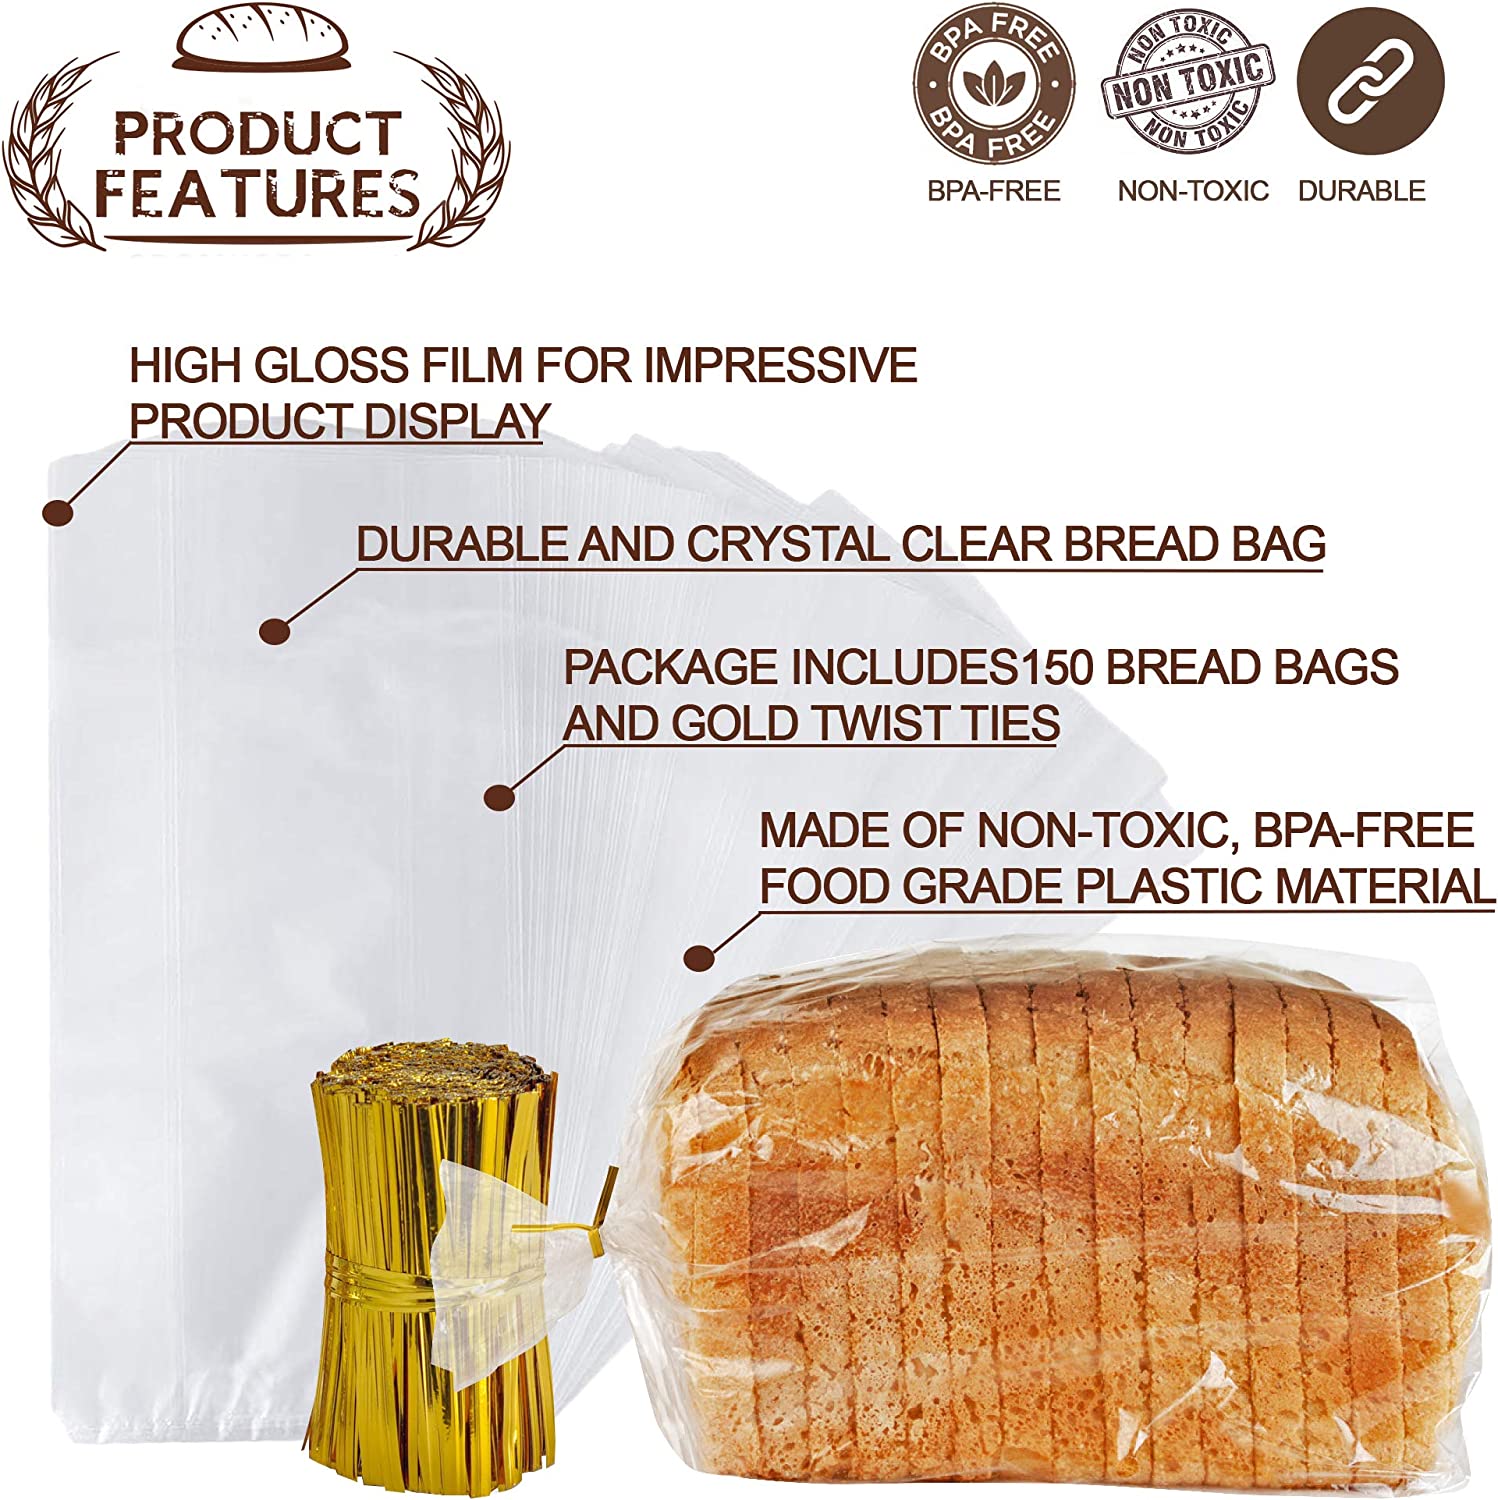 Bread Bag Product Features